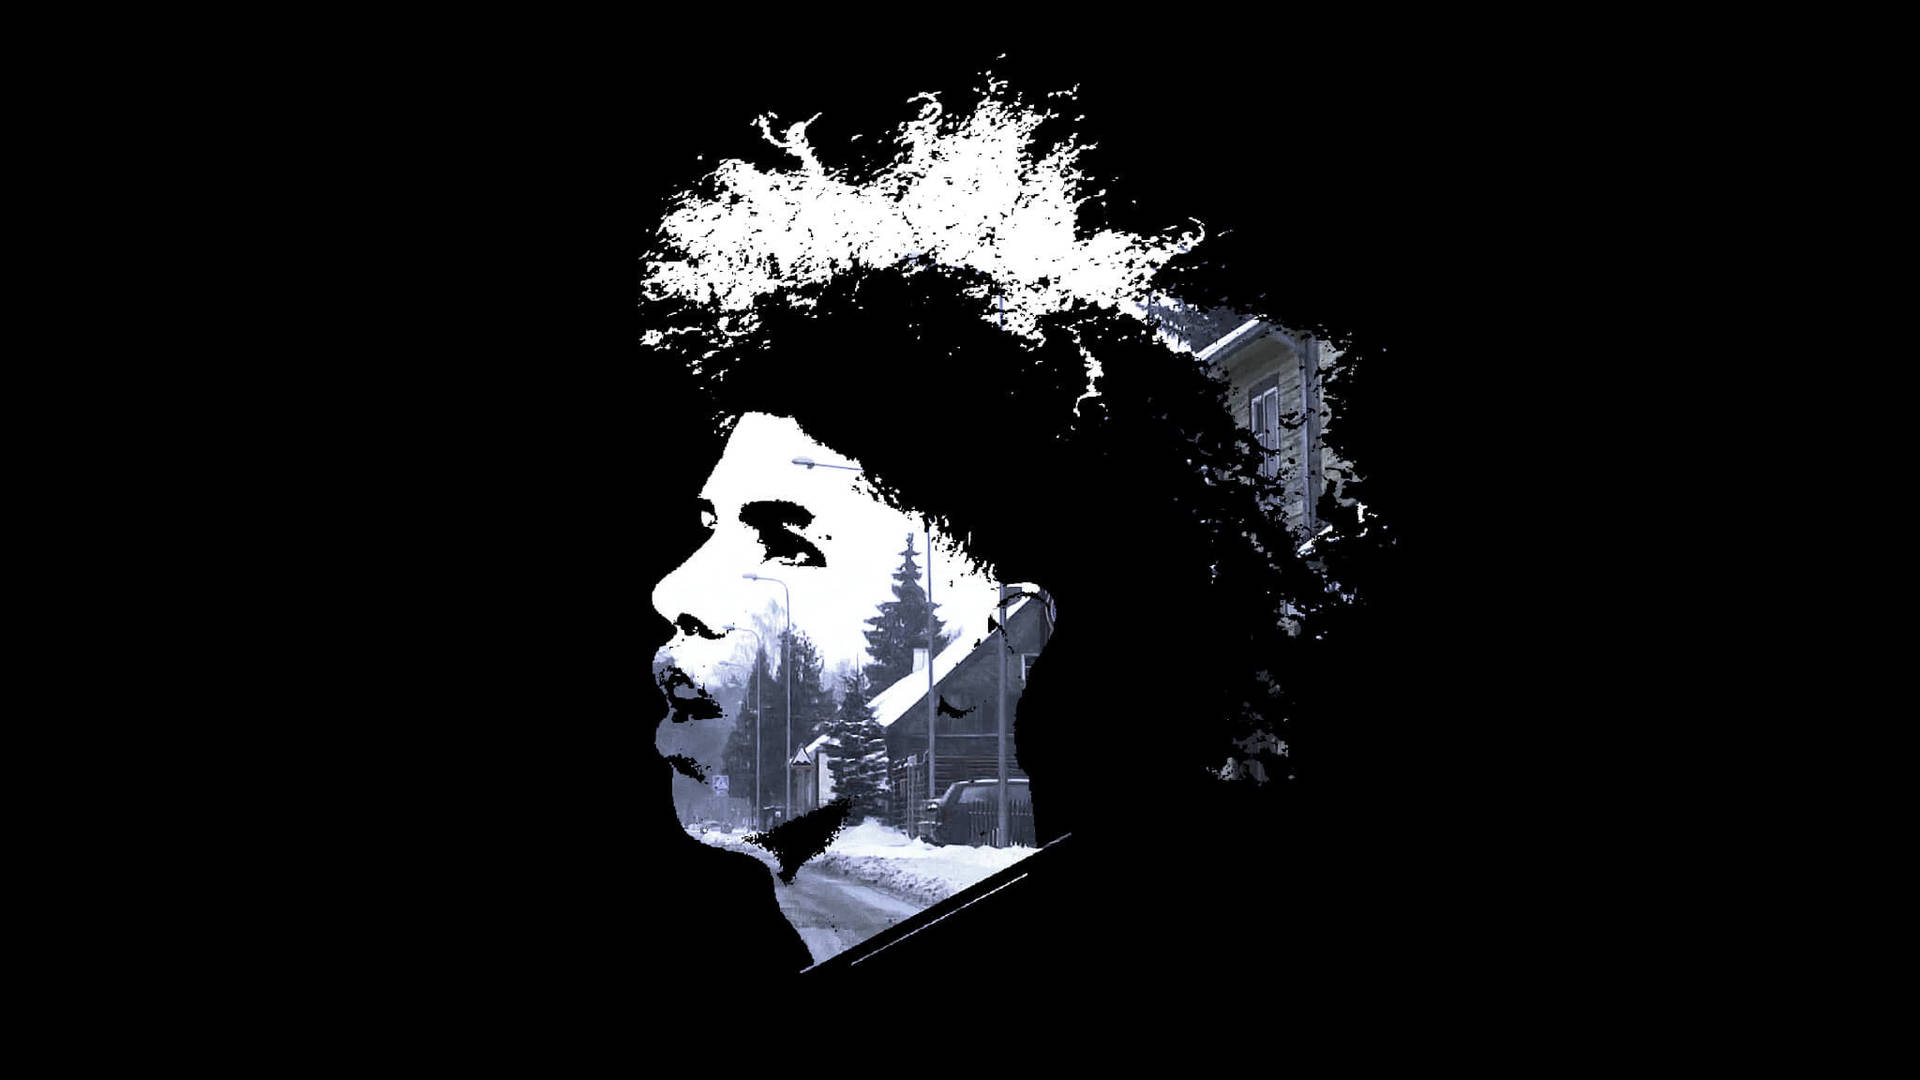 Lamelo Ball In Black And White Background